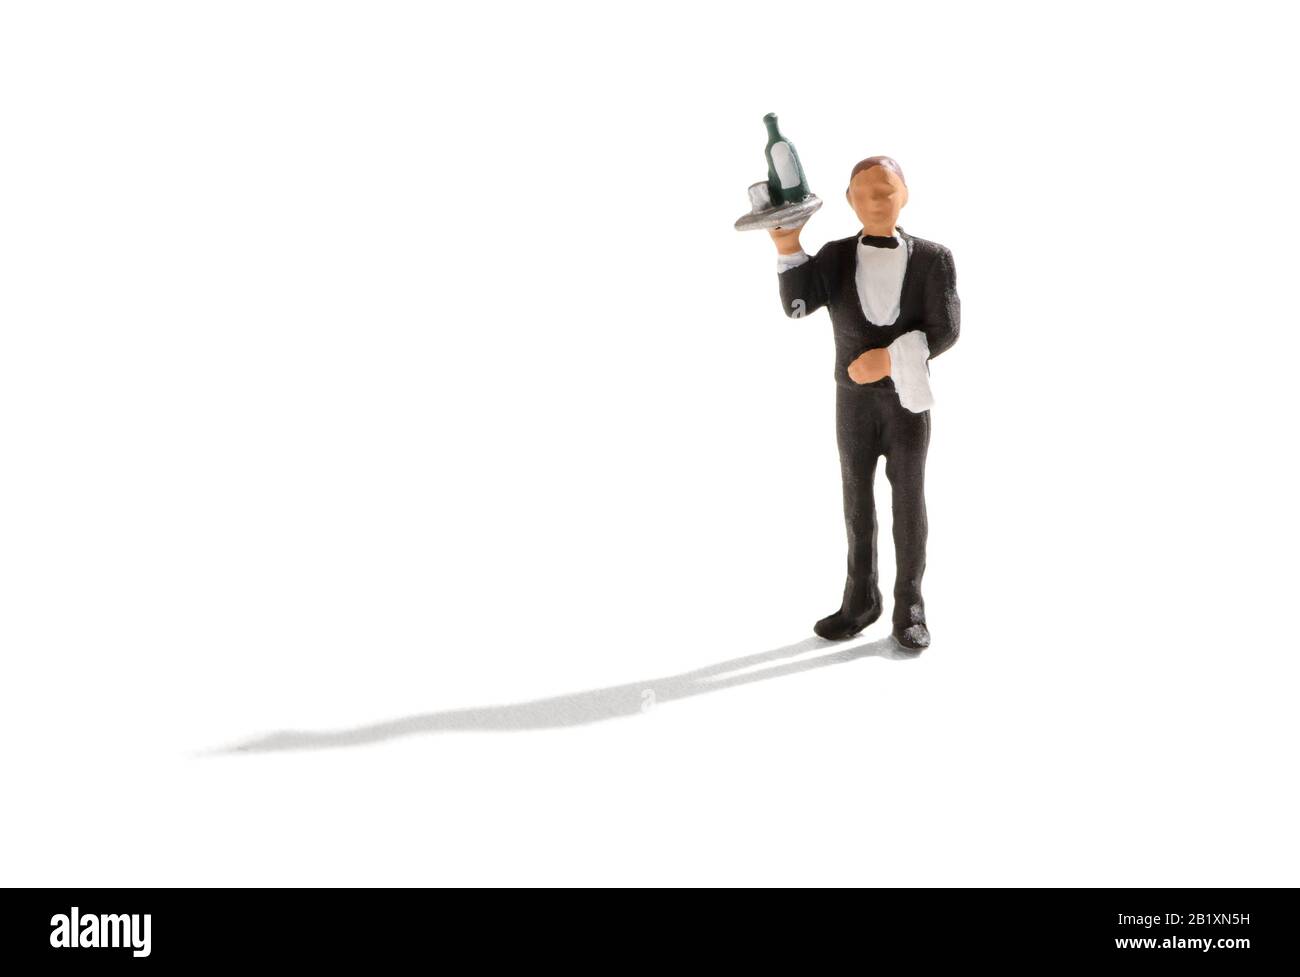 Miniature wine waiter with bottle of wine on tray in a tuxedo at a nightclub or hotel over a white background Stock Photo